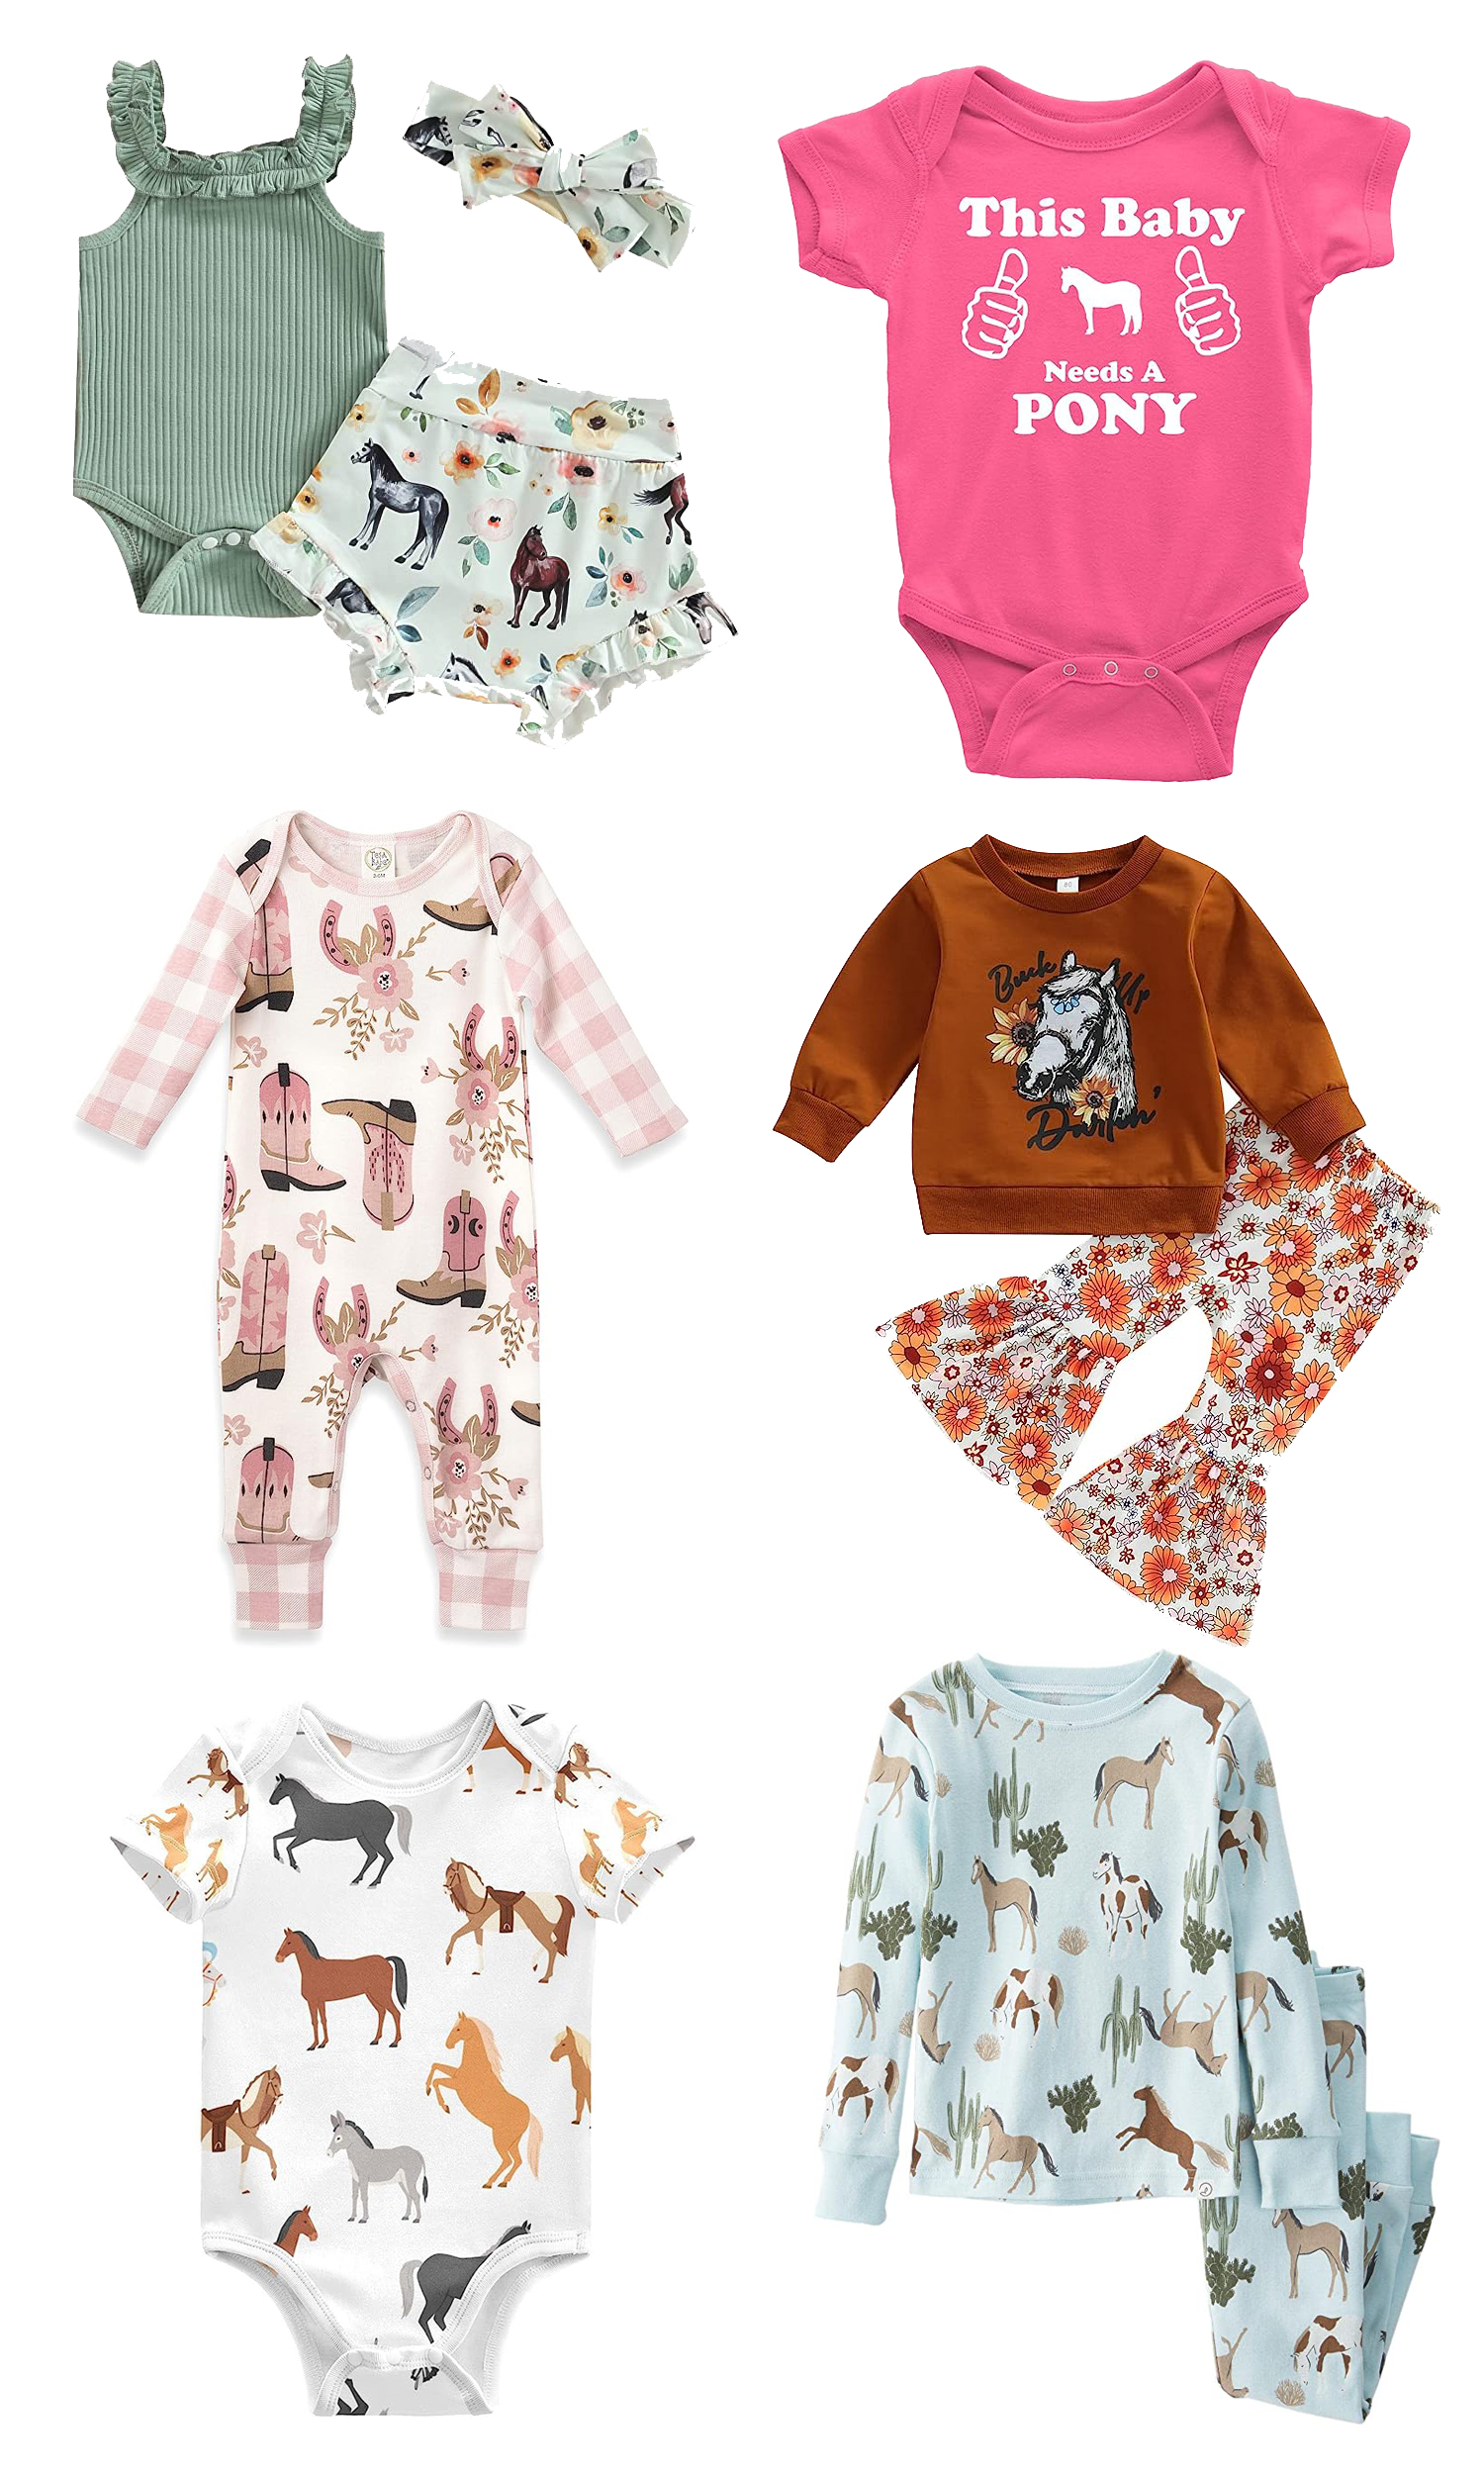 Equestrian baby clothing